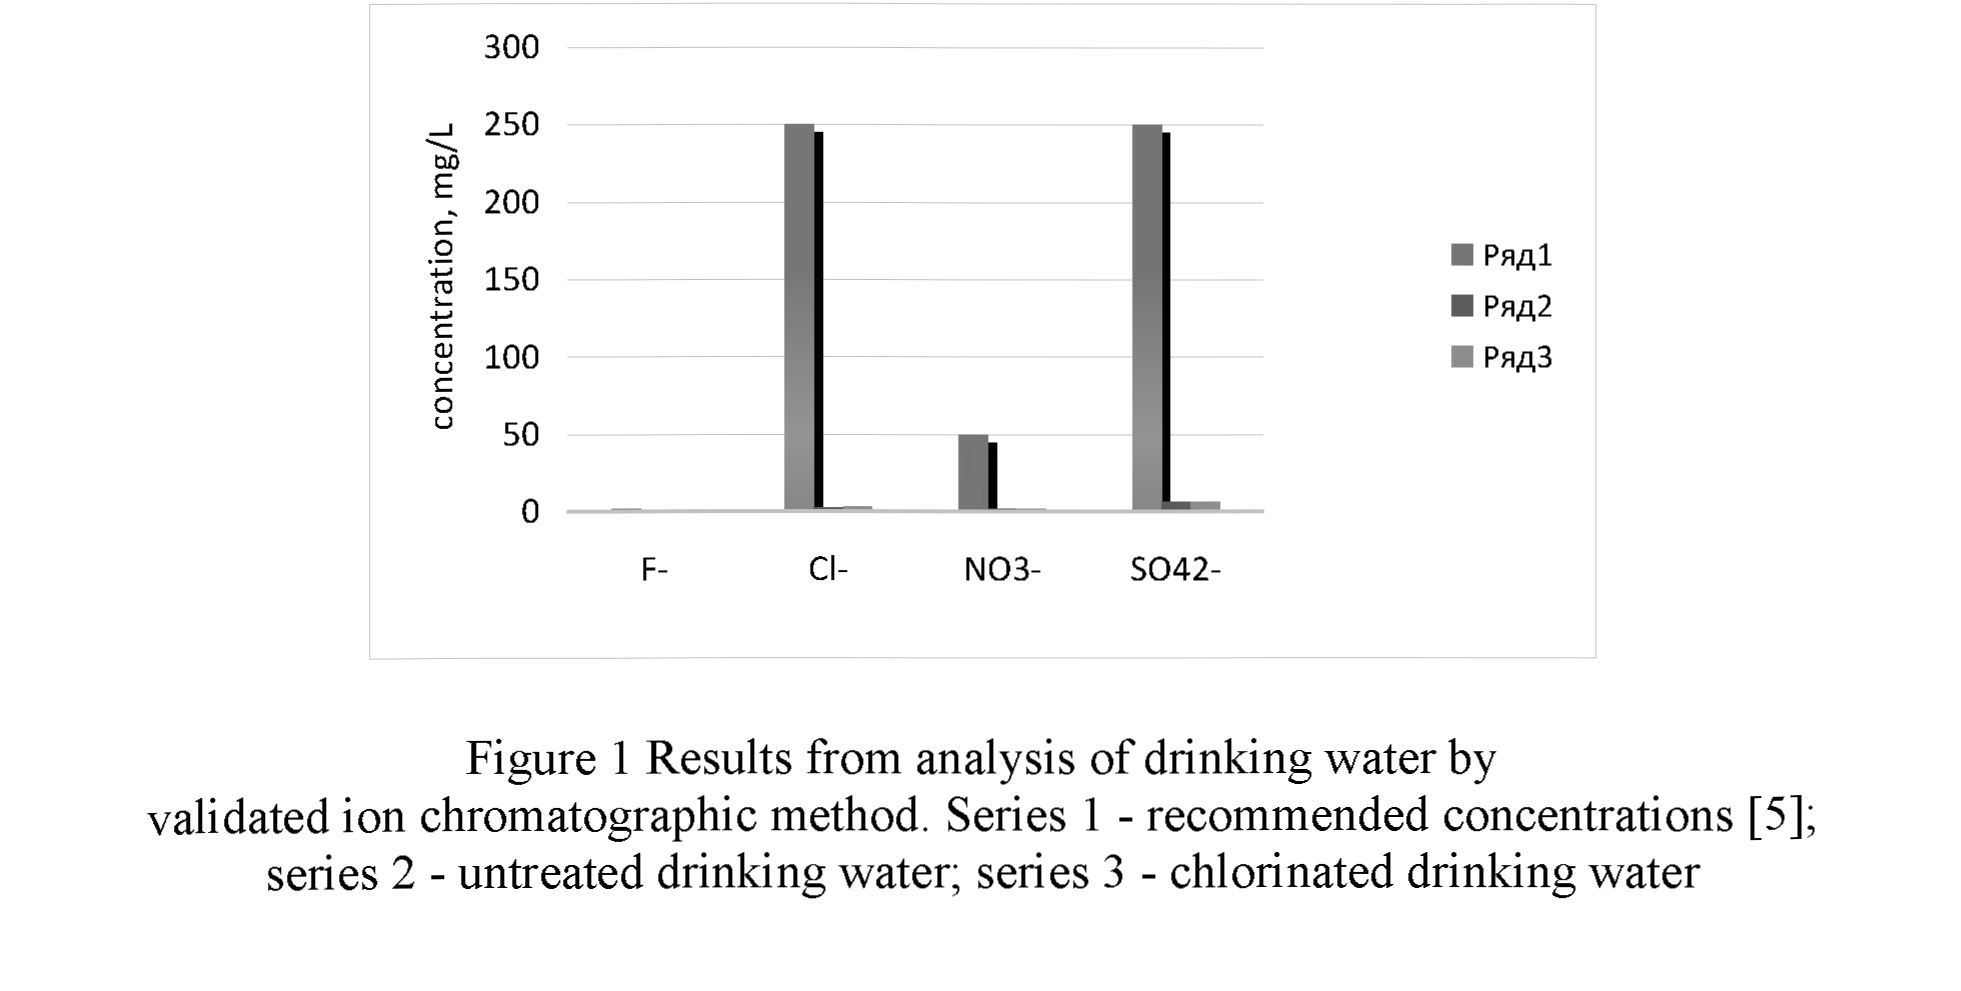 Anion composition determination of natural waters by the method of ion chromatographic